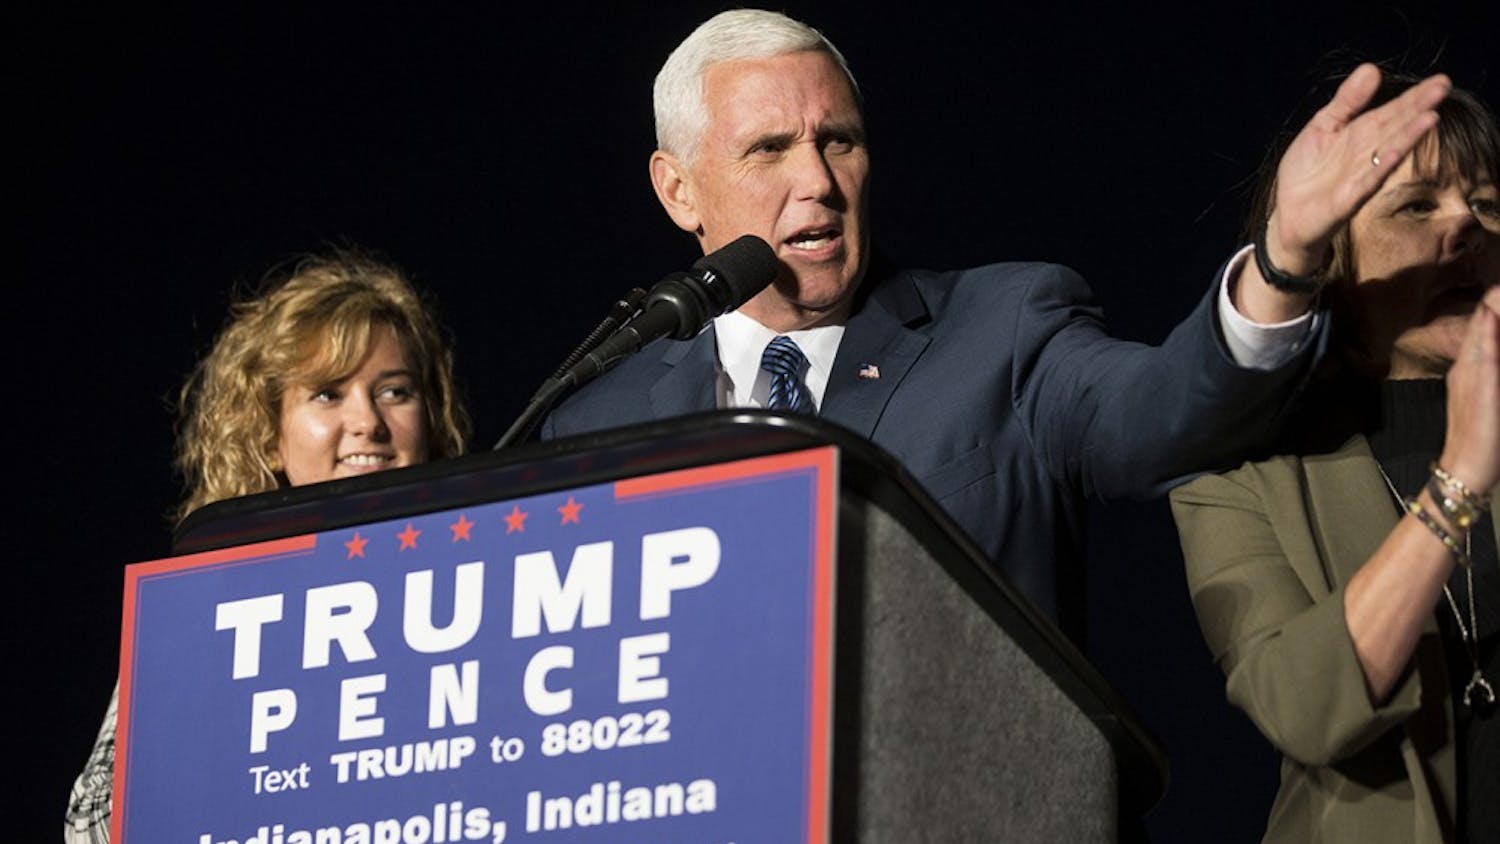 Vice President-Elect Mike Pence addresses a crowd of supporters at the Indianapolis Airport on November 10, 2016. Photo/ Evan De Stefano